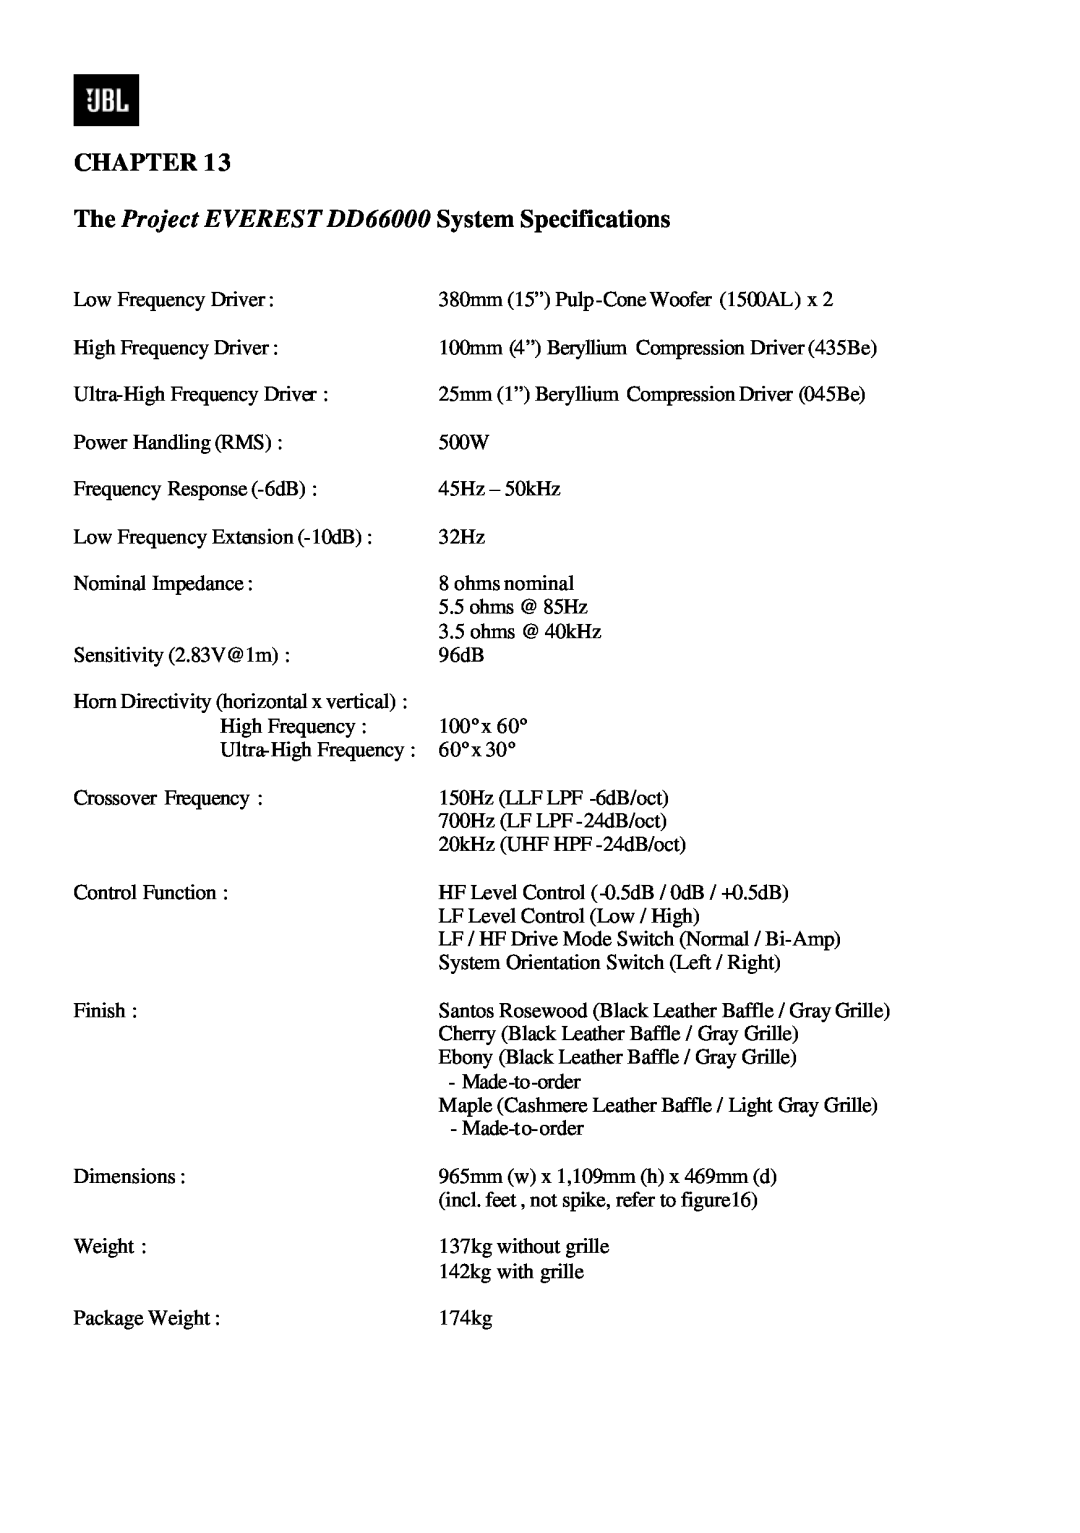 JBL manual Chapter, The Project EVEREST DD66000 System Specifications 